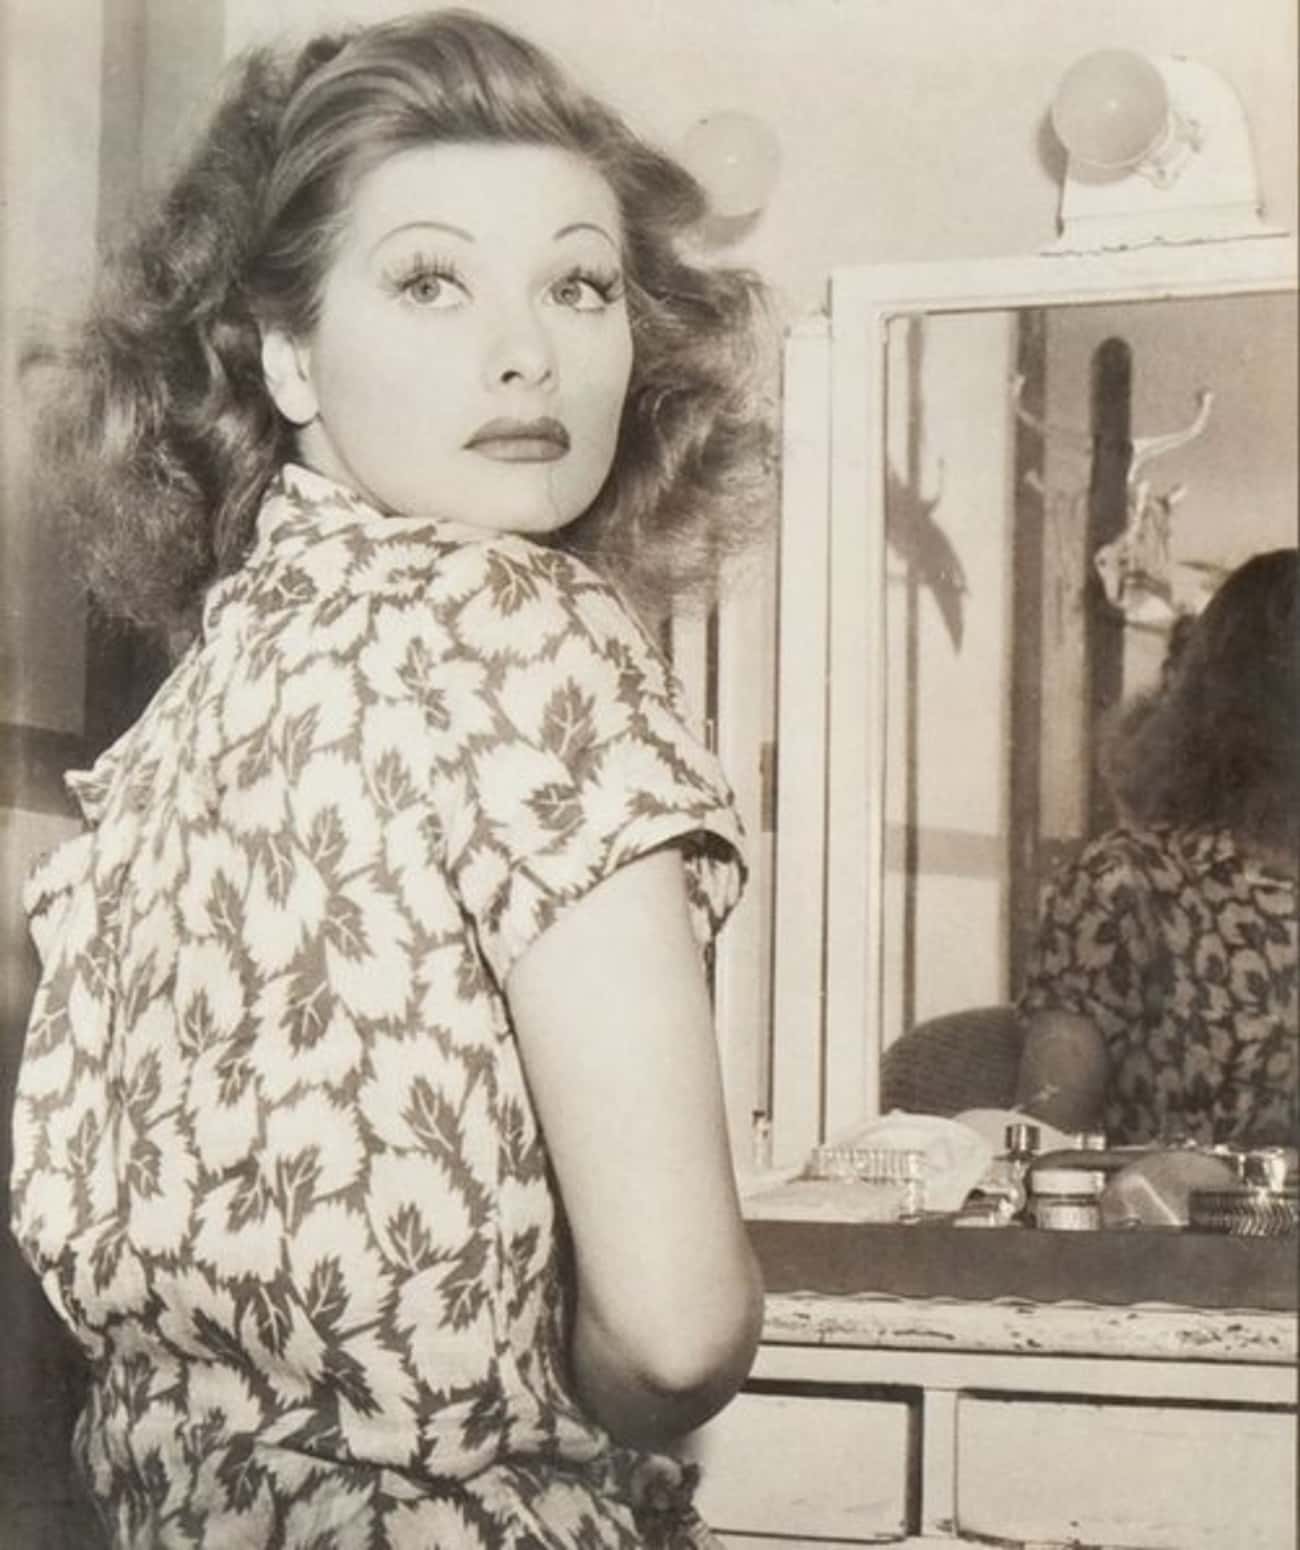 Young Lucille Ball in Patterned Dress